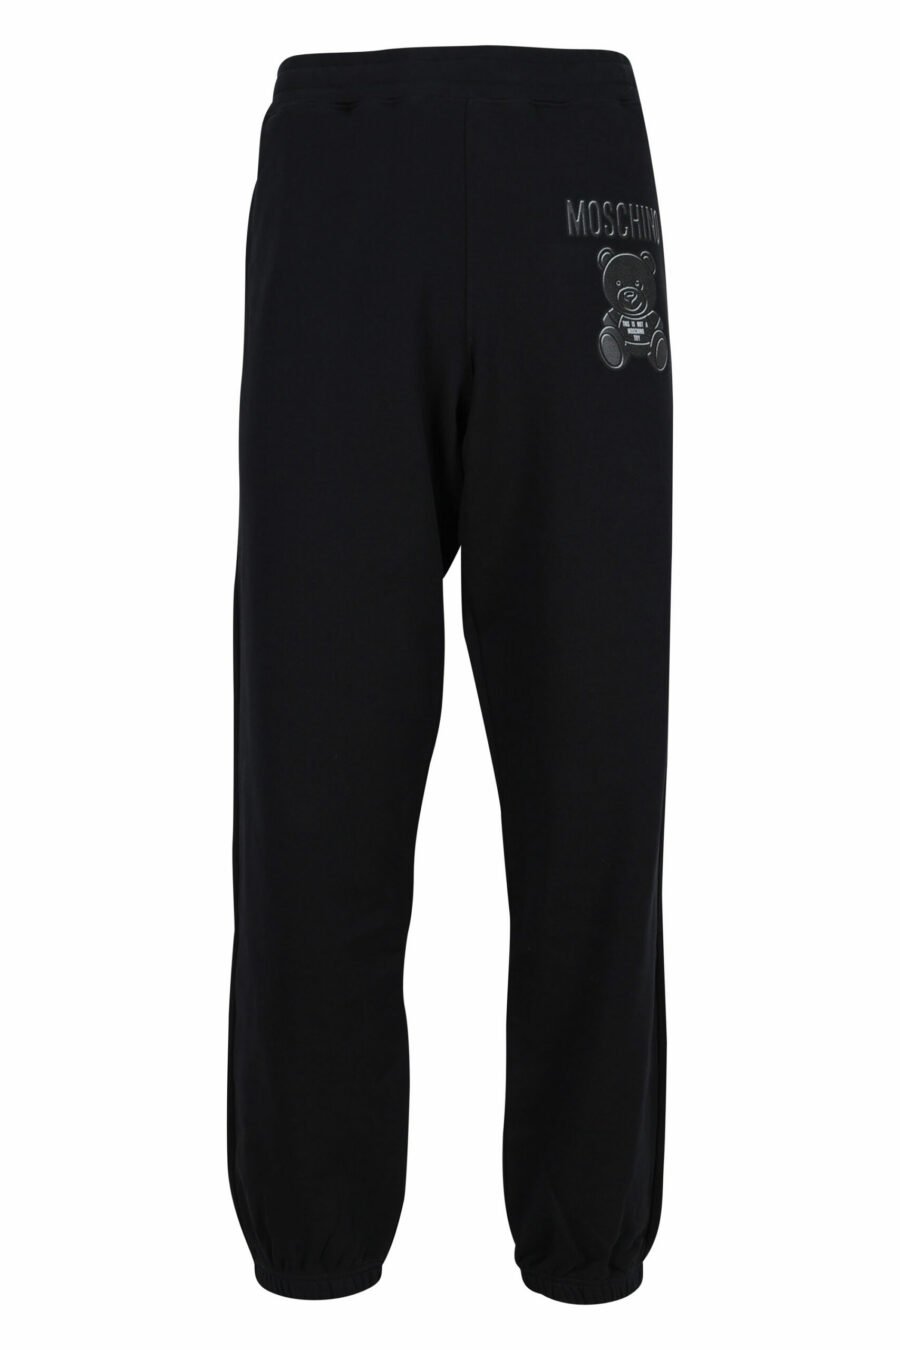 Tracksuit bottoms black with black "teddy" mini-logo - 889316837872 scaled